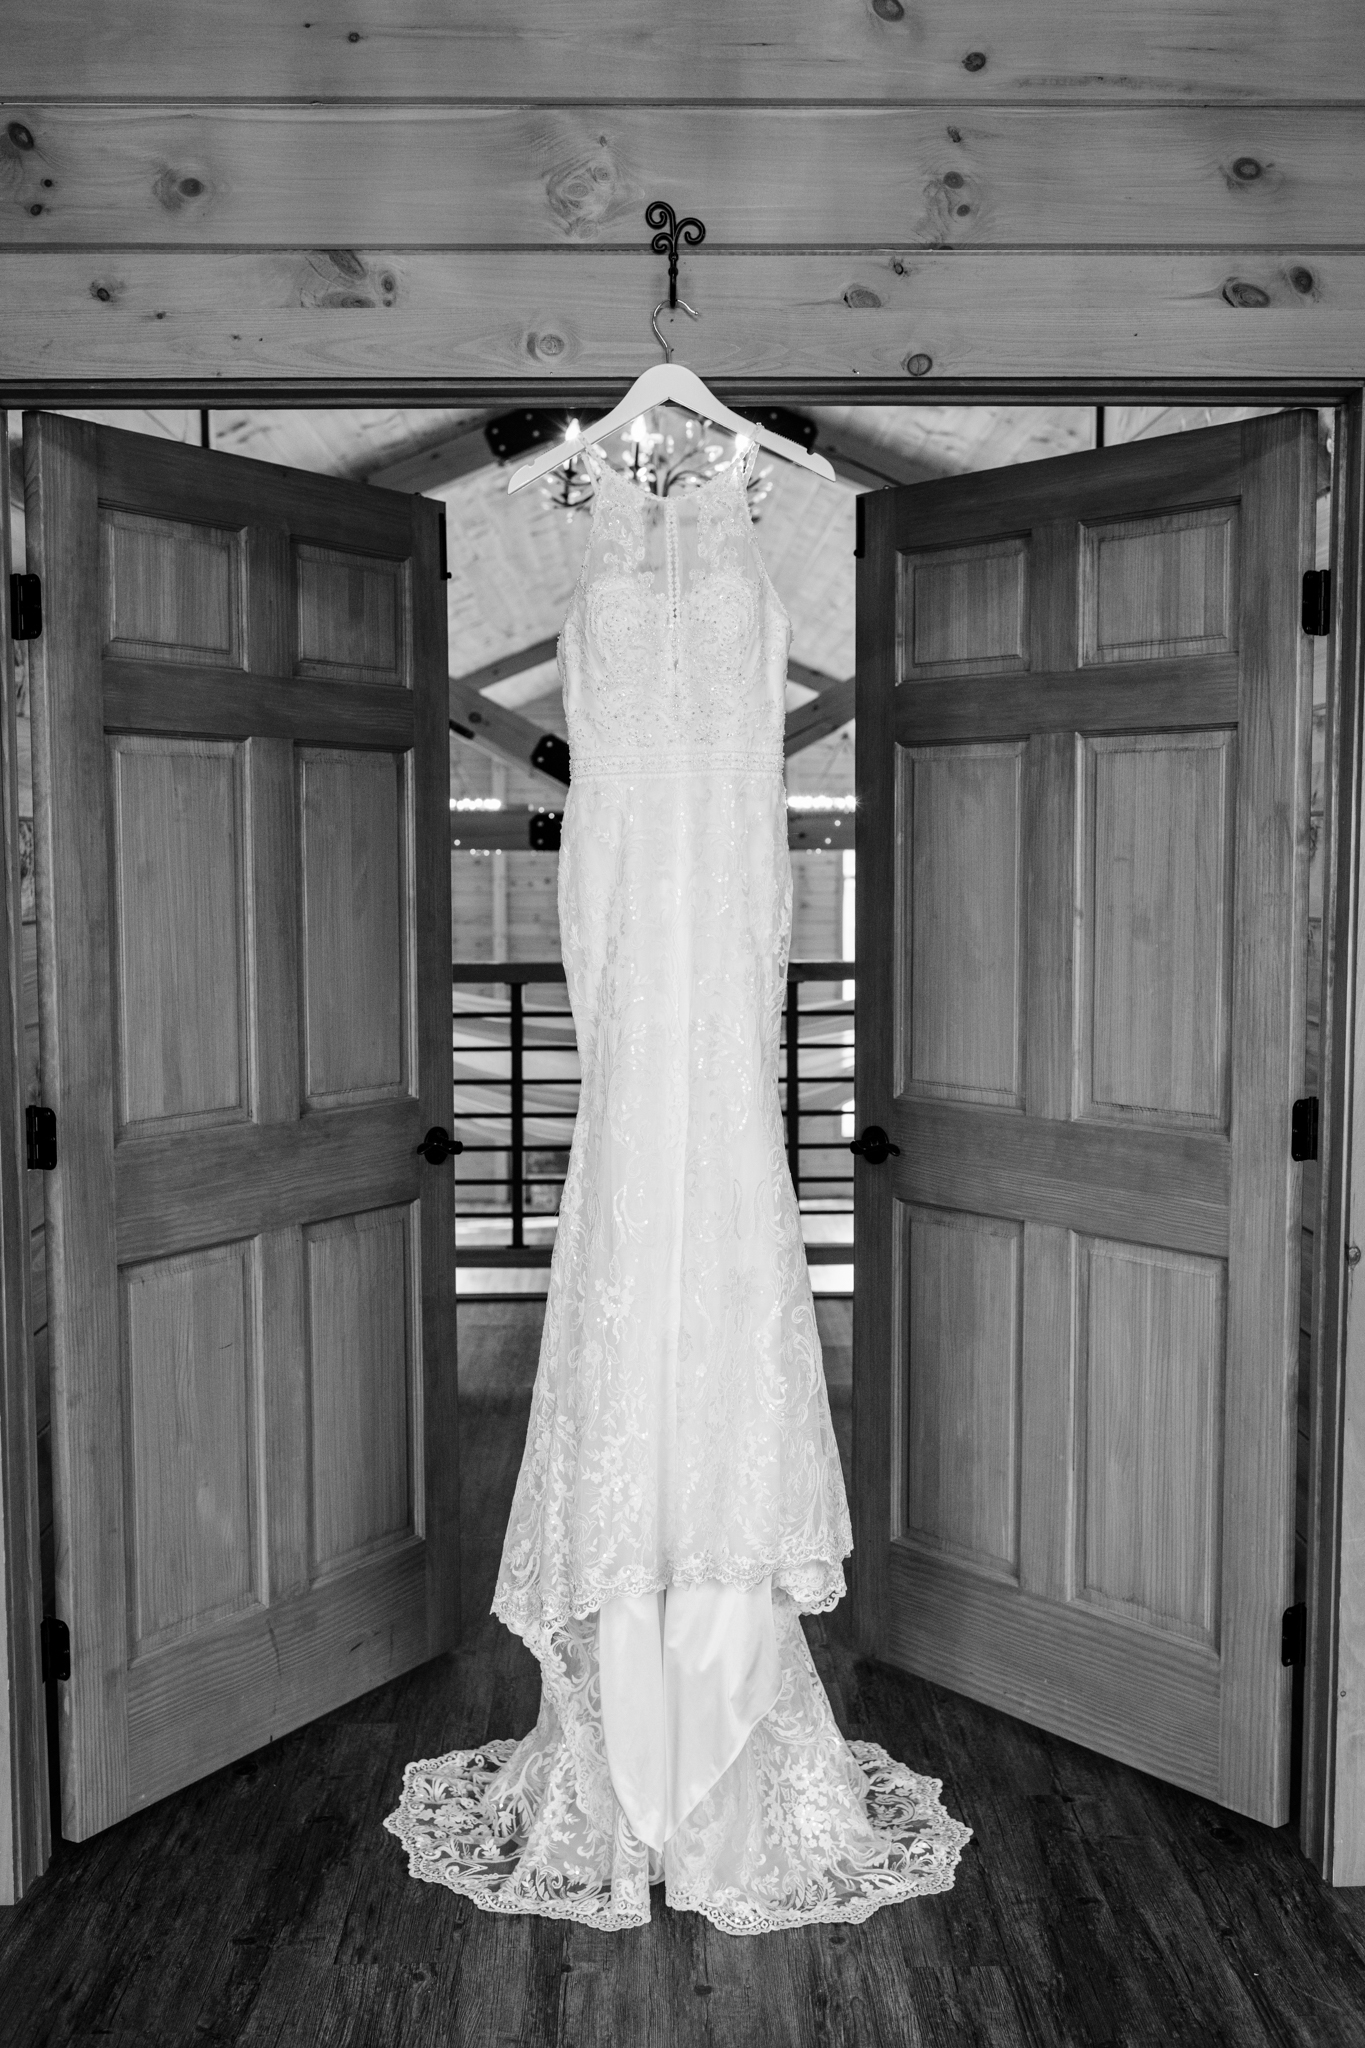 wedding dress hanging in a lodge